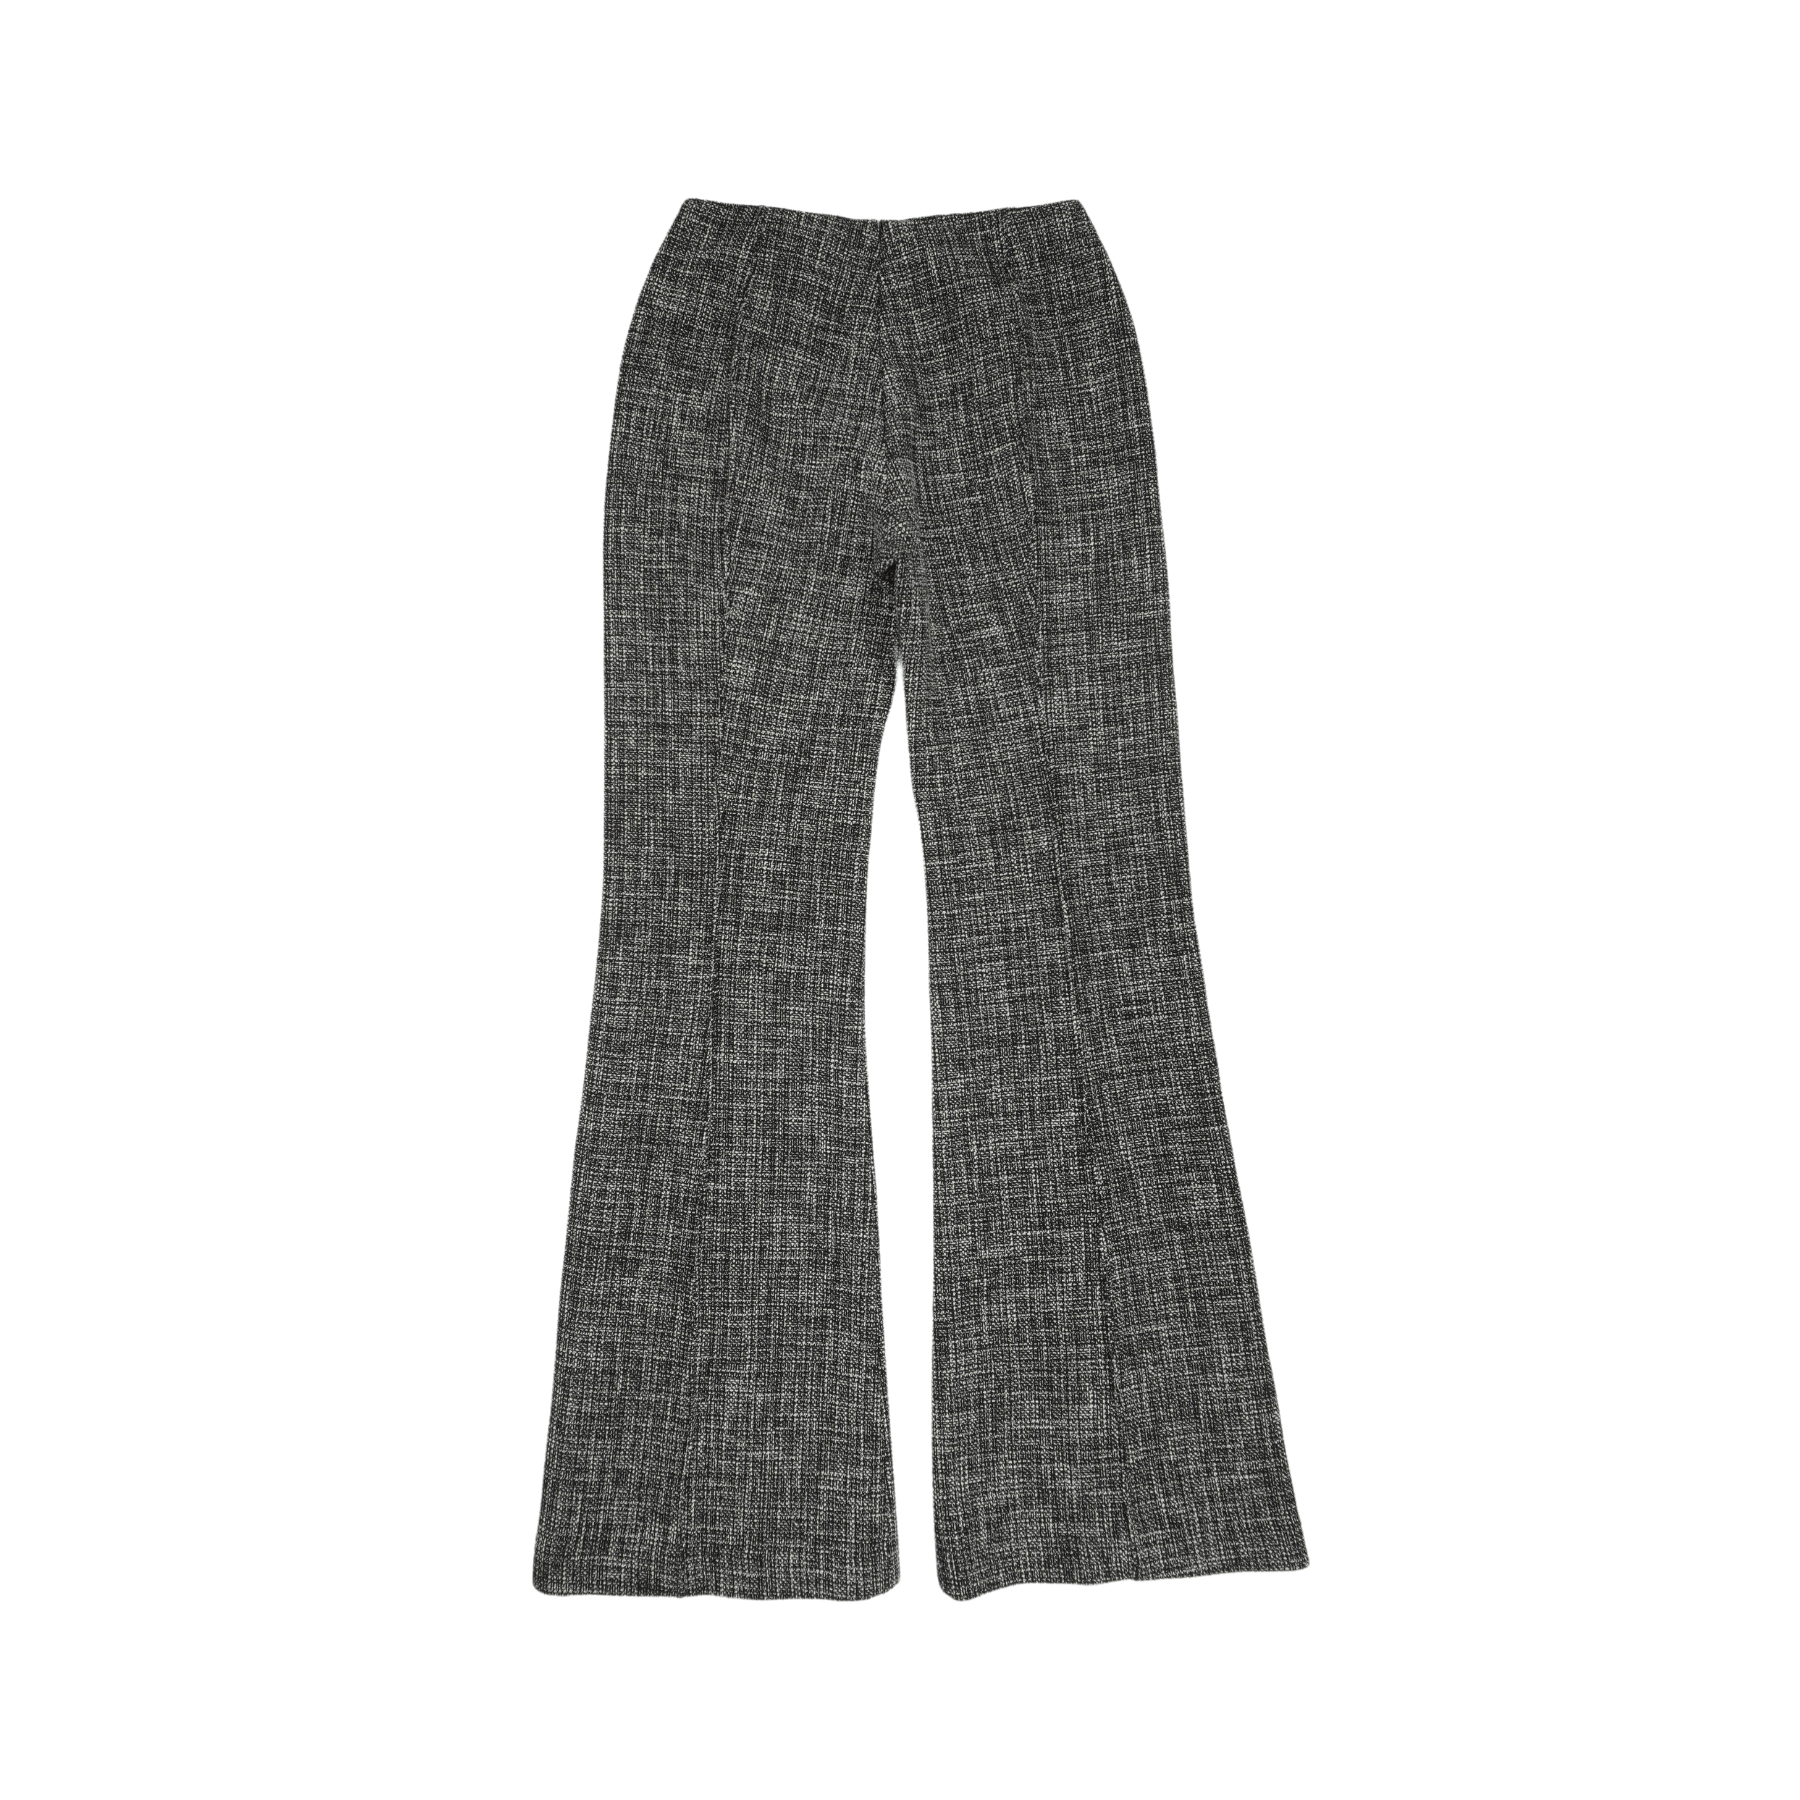 Smythe Trousers - Women's 2 - Fashionably Yours